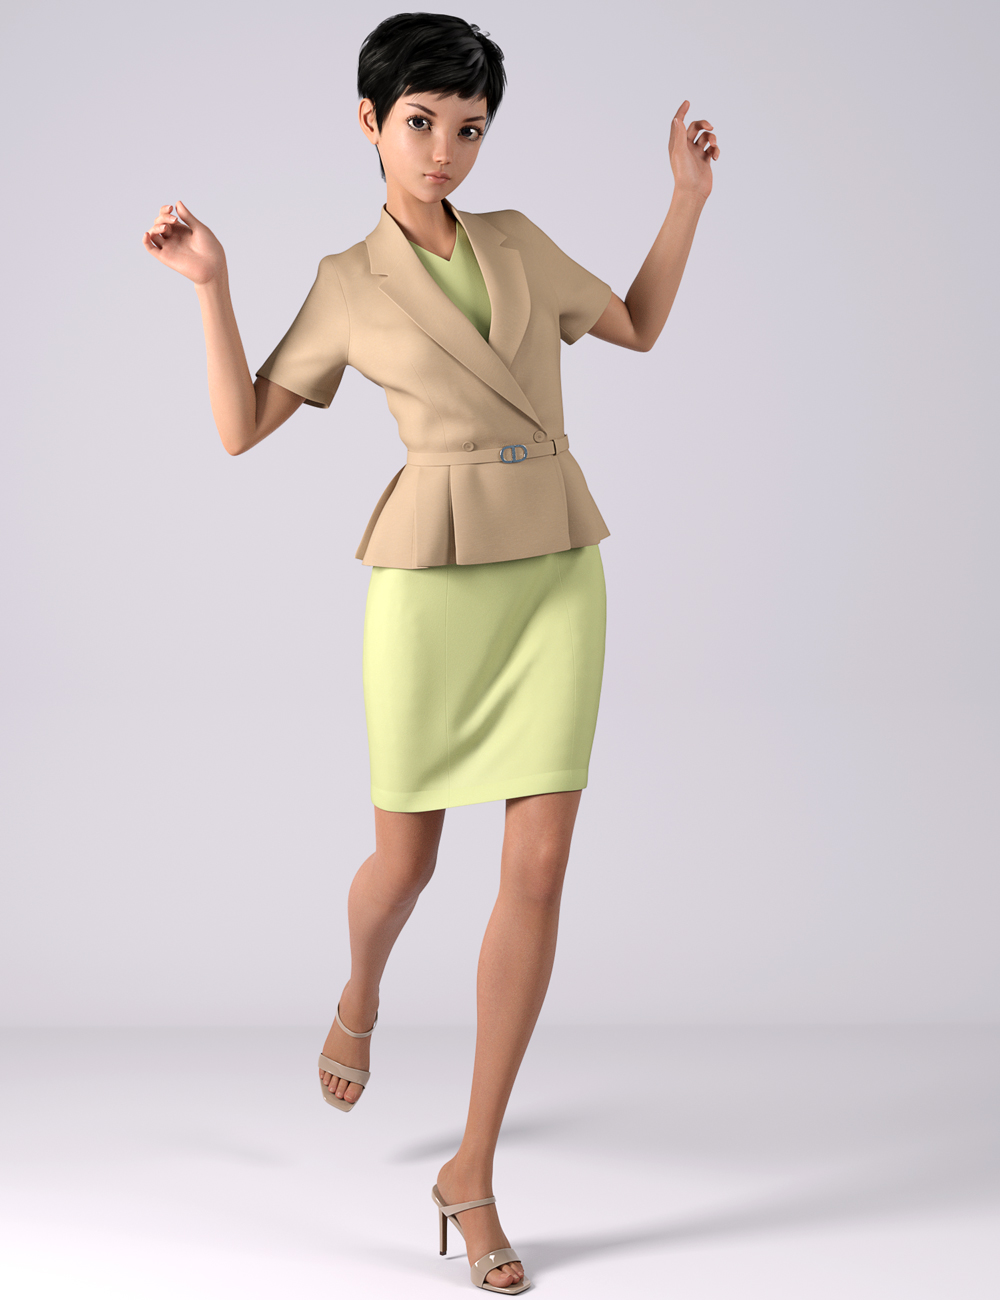 dForce HnC Summer Office Outfits for Genesis 8.1 Females by: IH Kang, 3D Models by Daz 3D